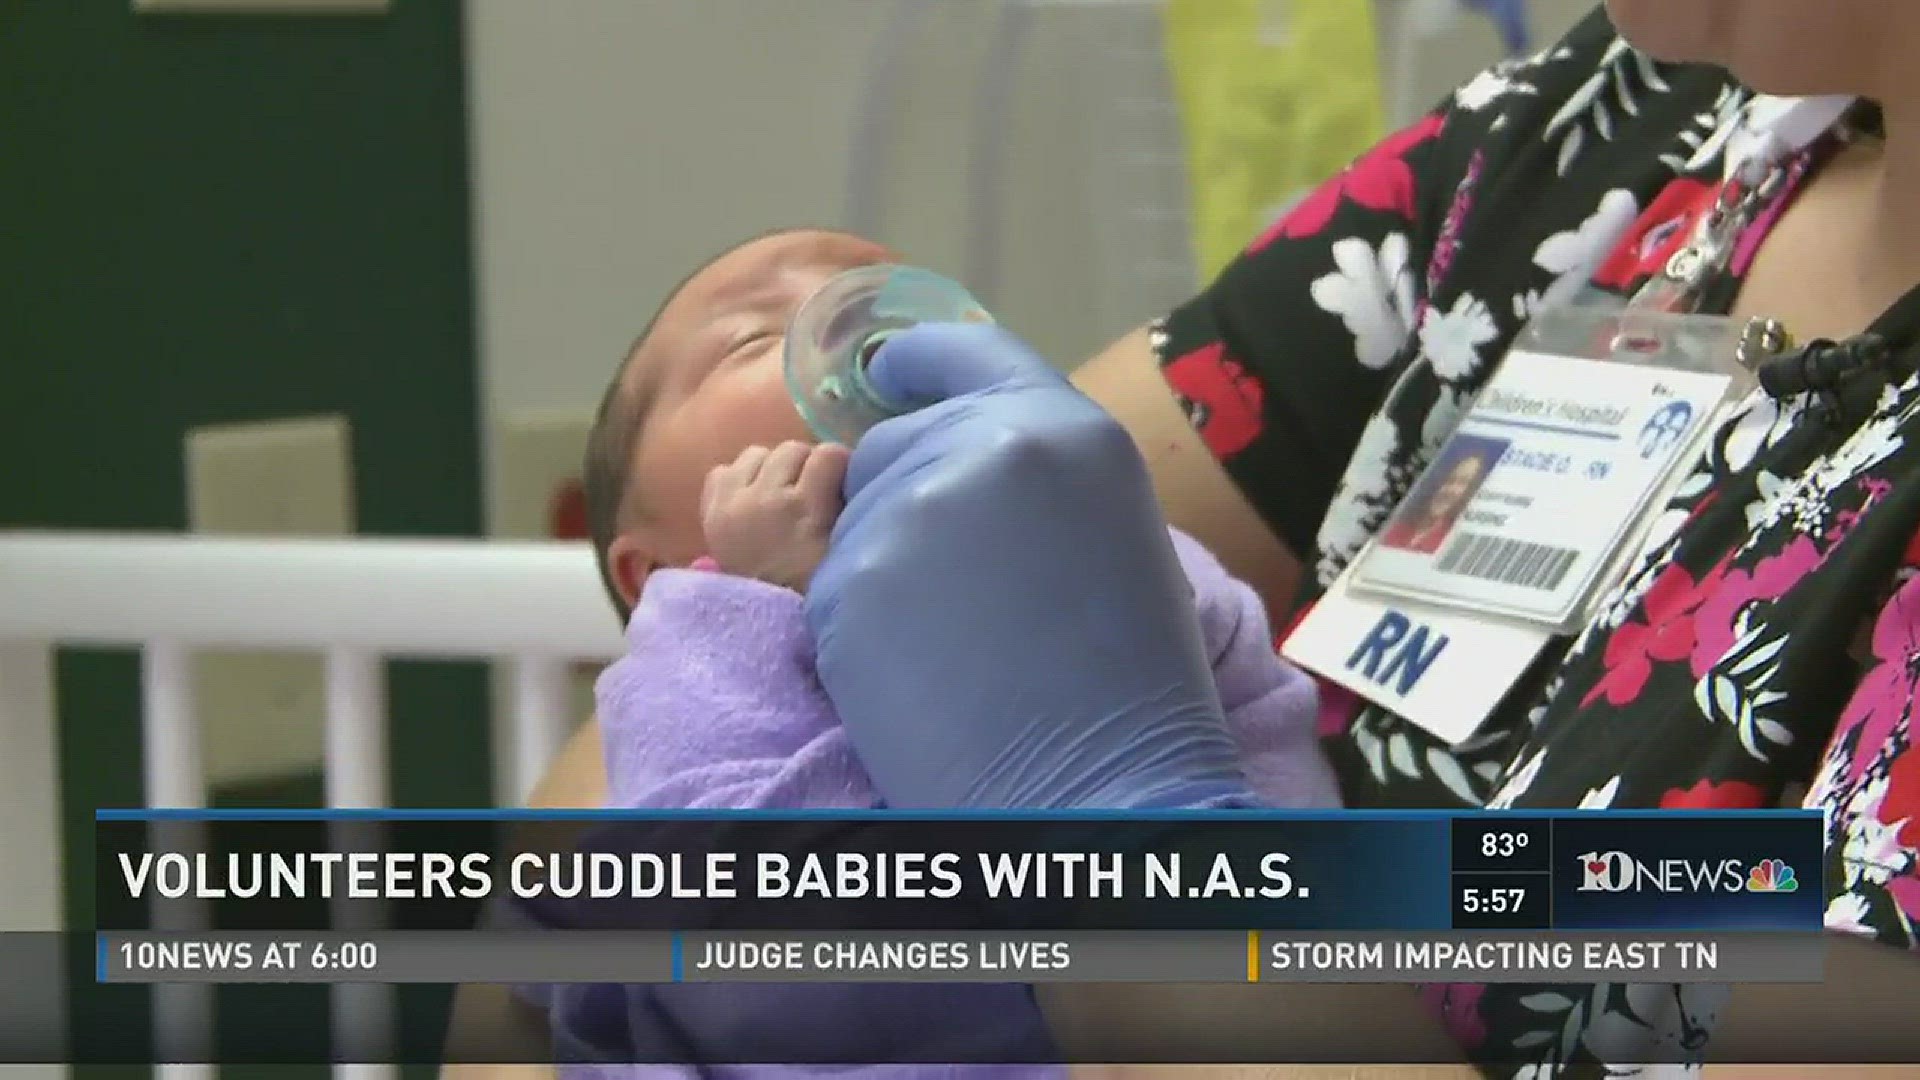 Oct. 5, 2016: Volunteer cuddlers at Children's Hospital help comfort babies suffering from Neonatal Abstinence Syndrome.